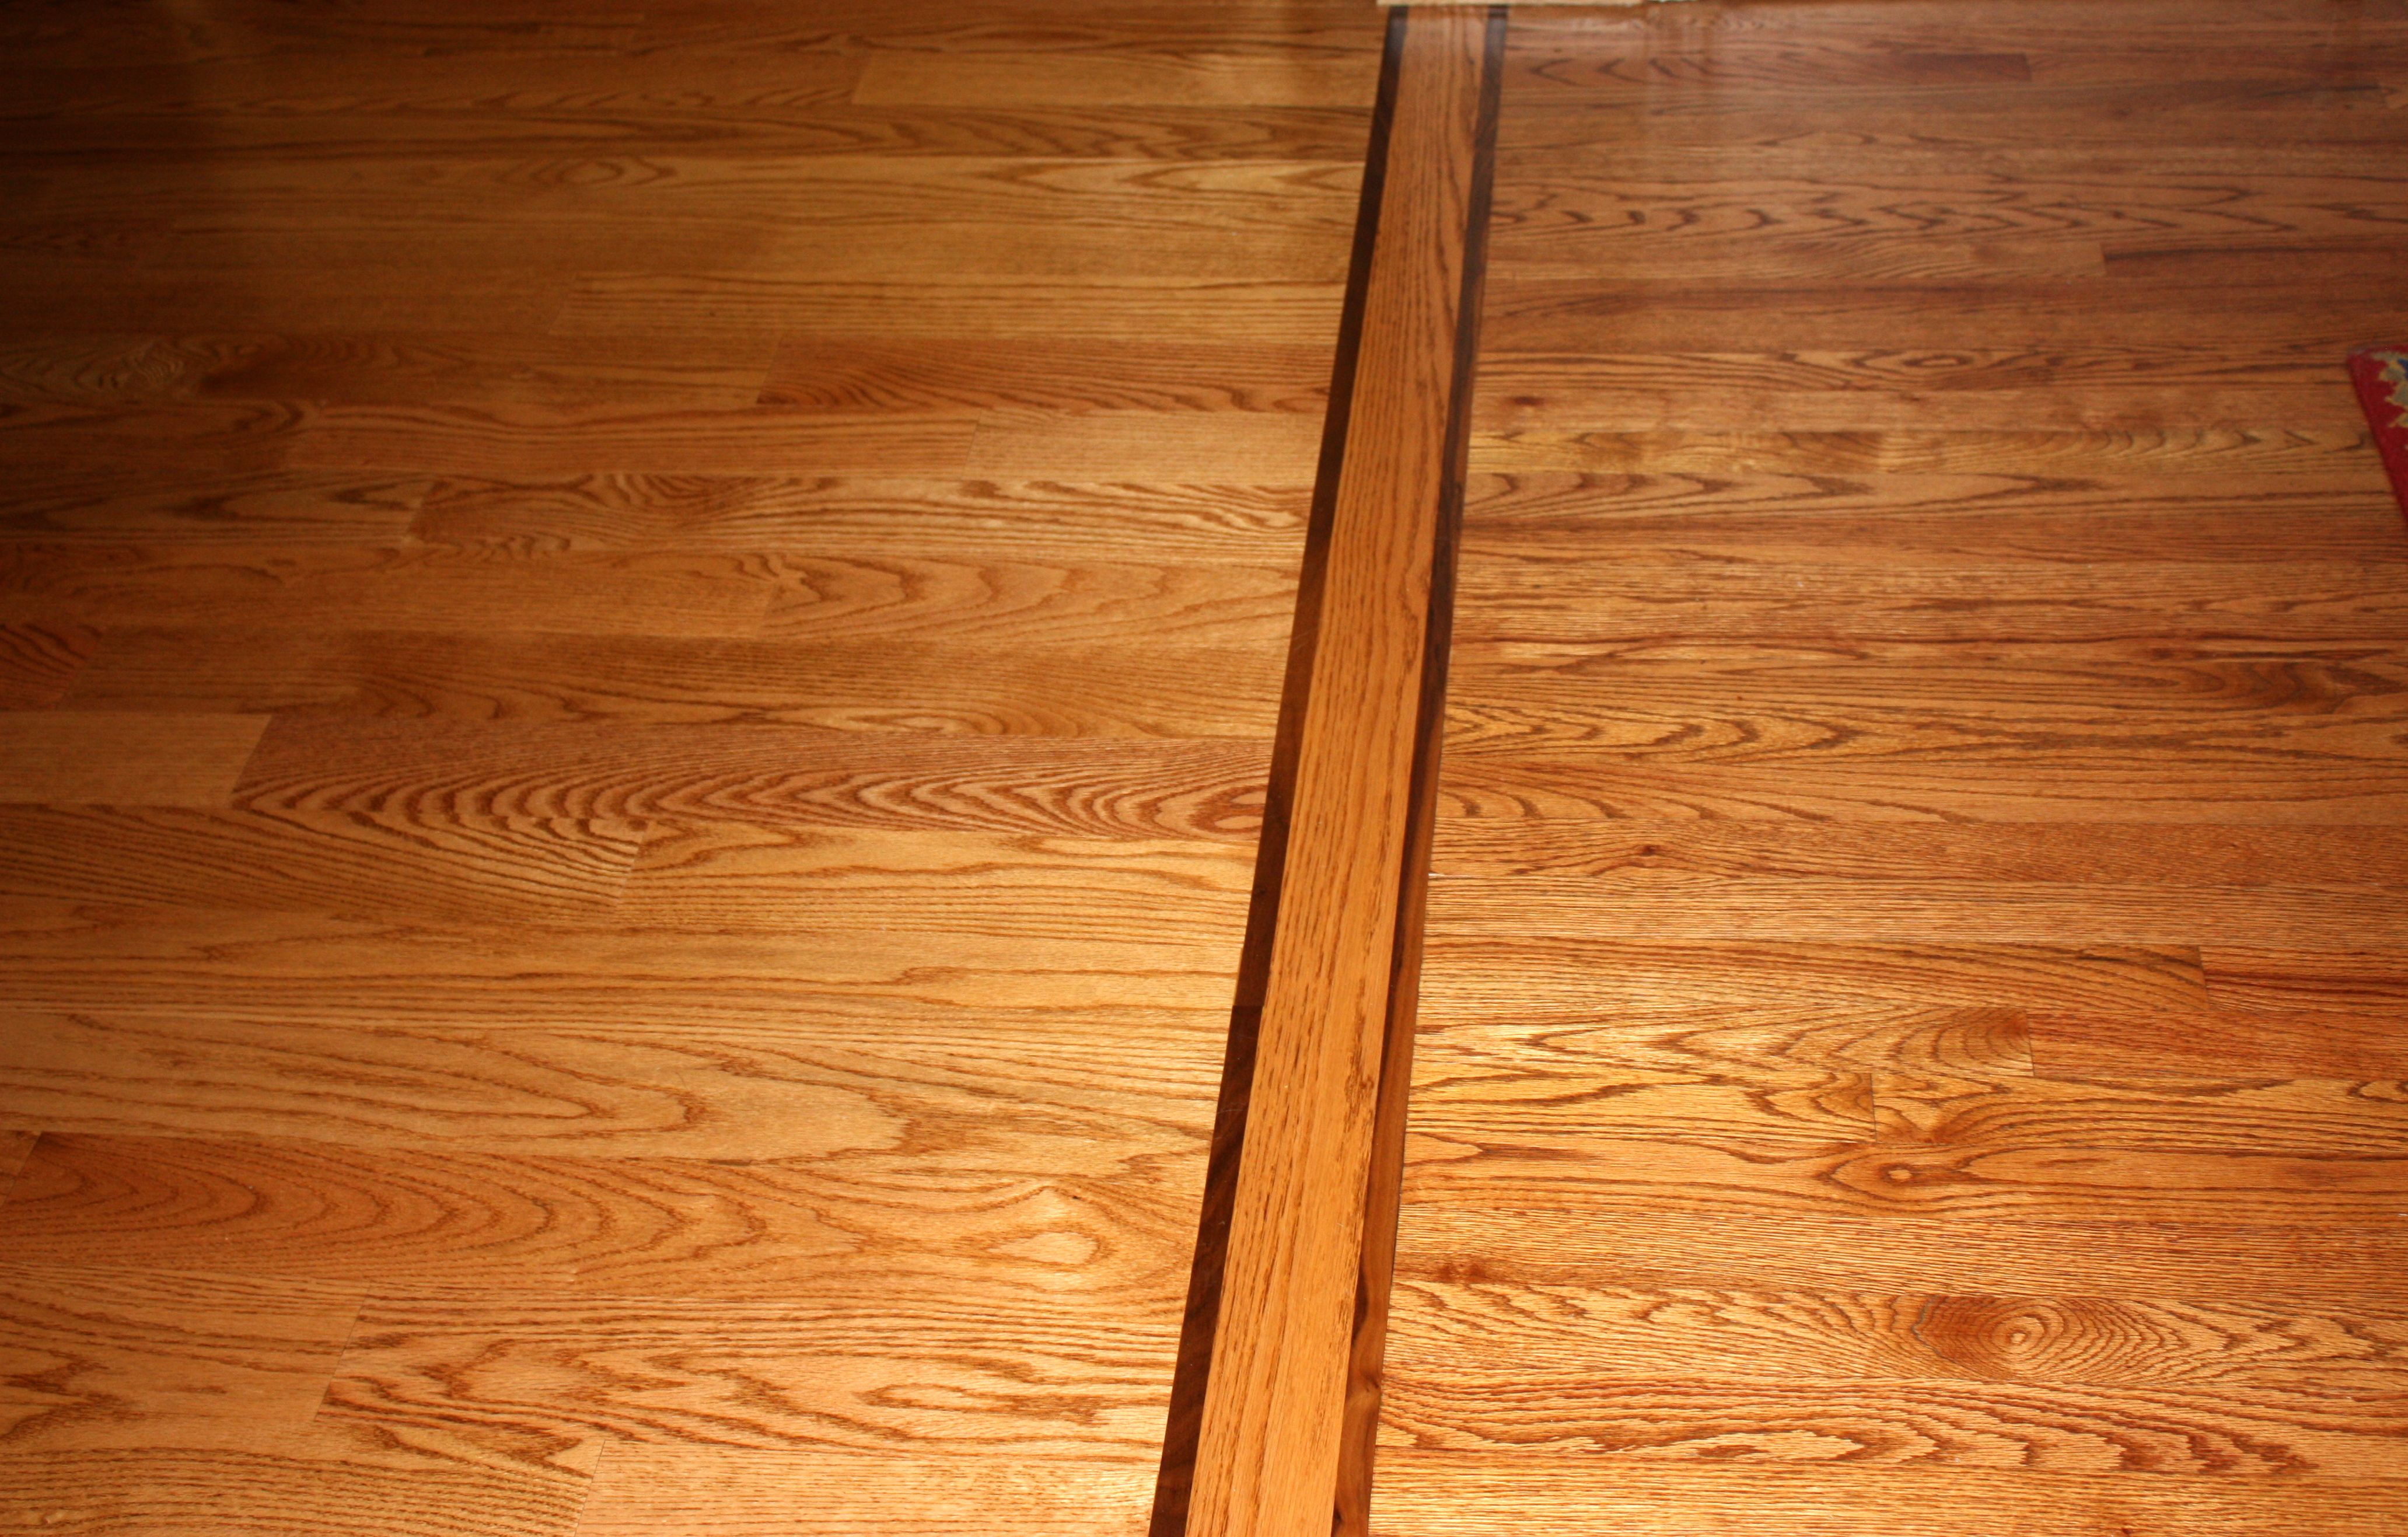 Matching An Existing Hardwood Floor, Can You Match Existing Laminate Flooring